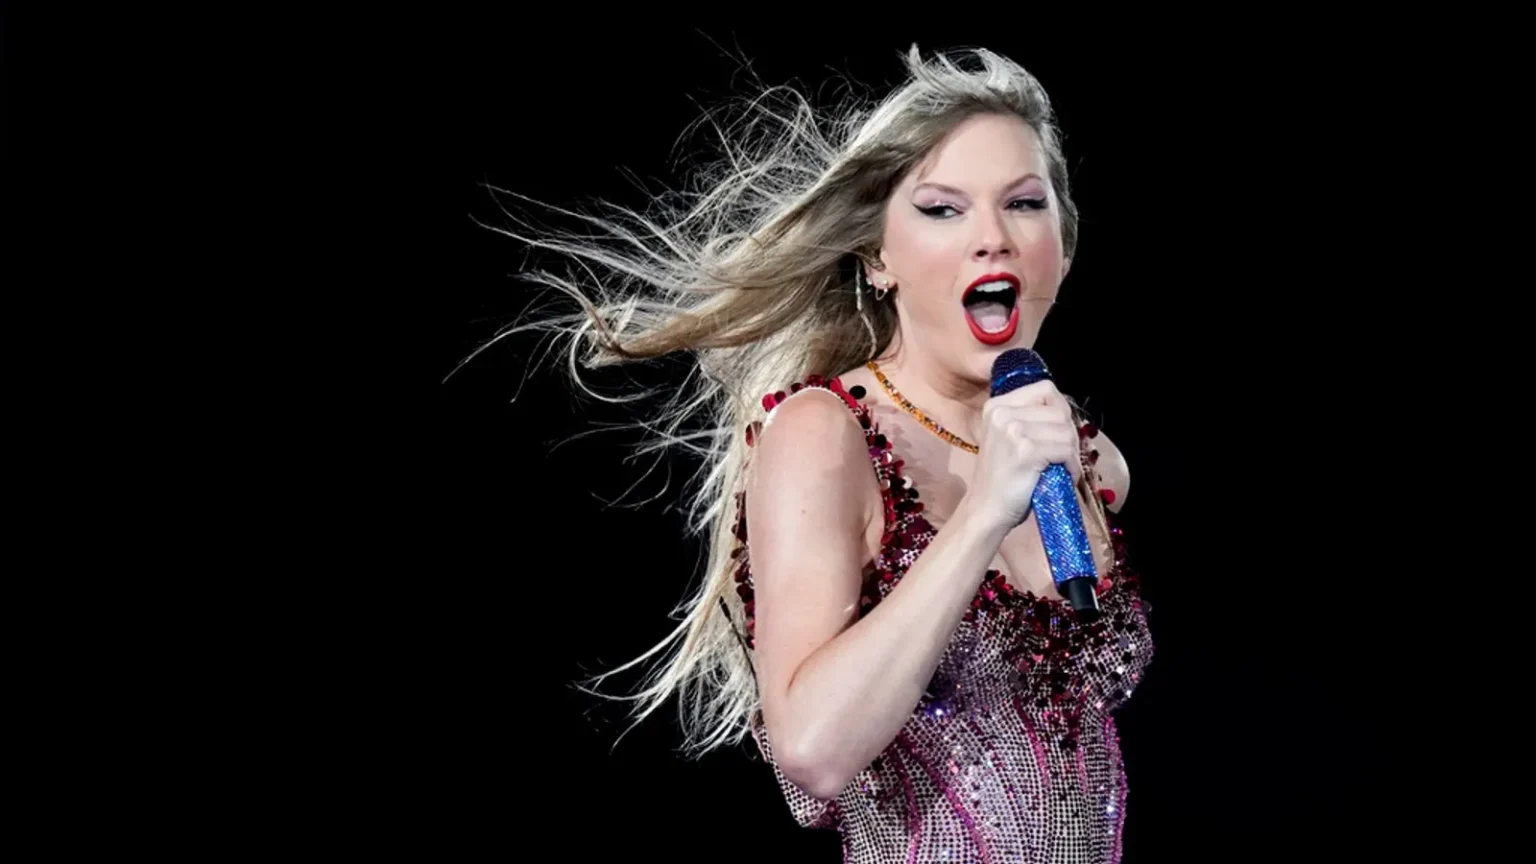 taylor-swift-makes-her-name-as-a-billionaire-on-the-worlds-richest-list